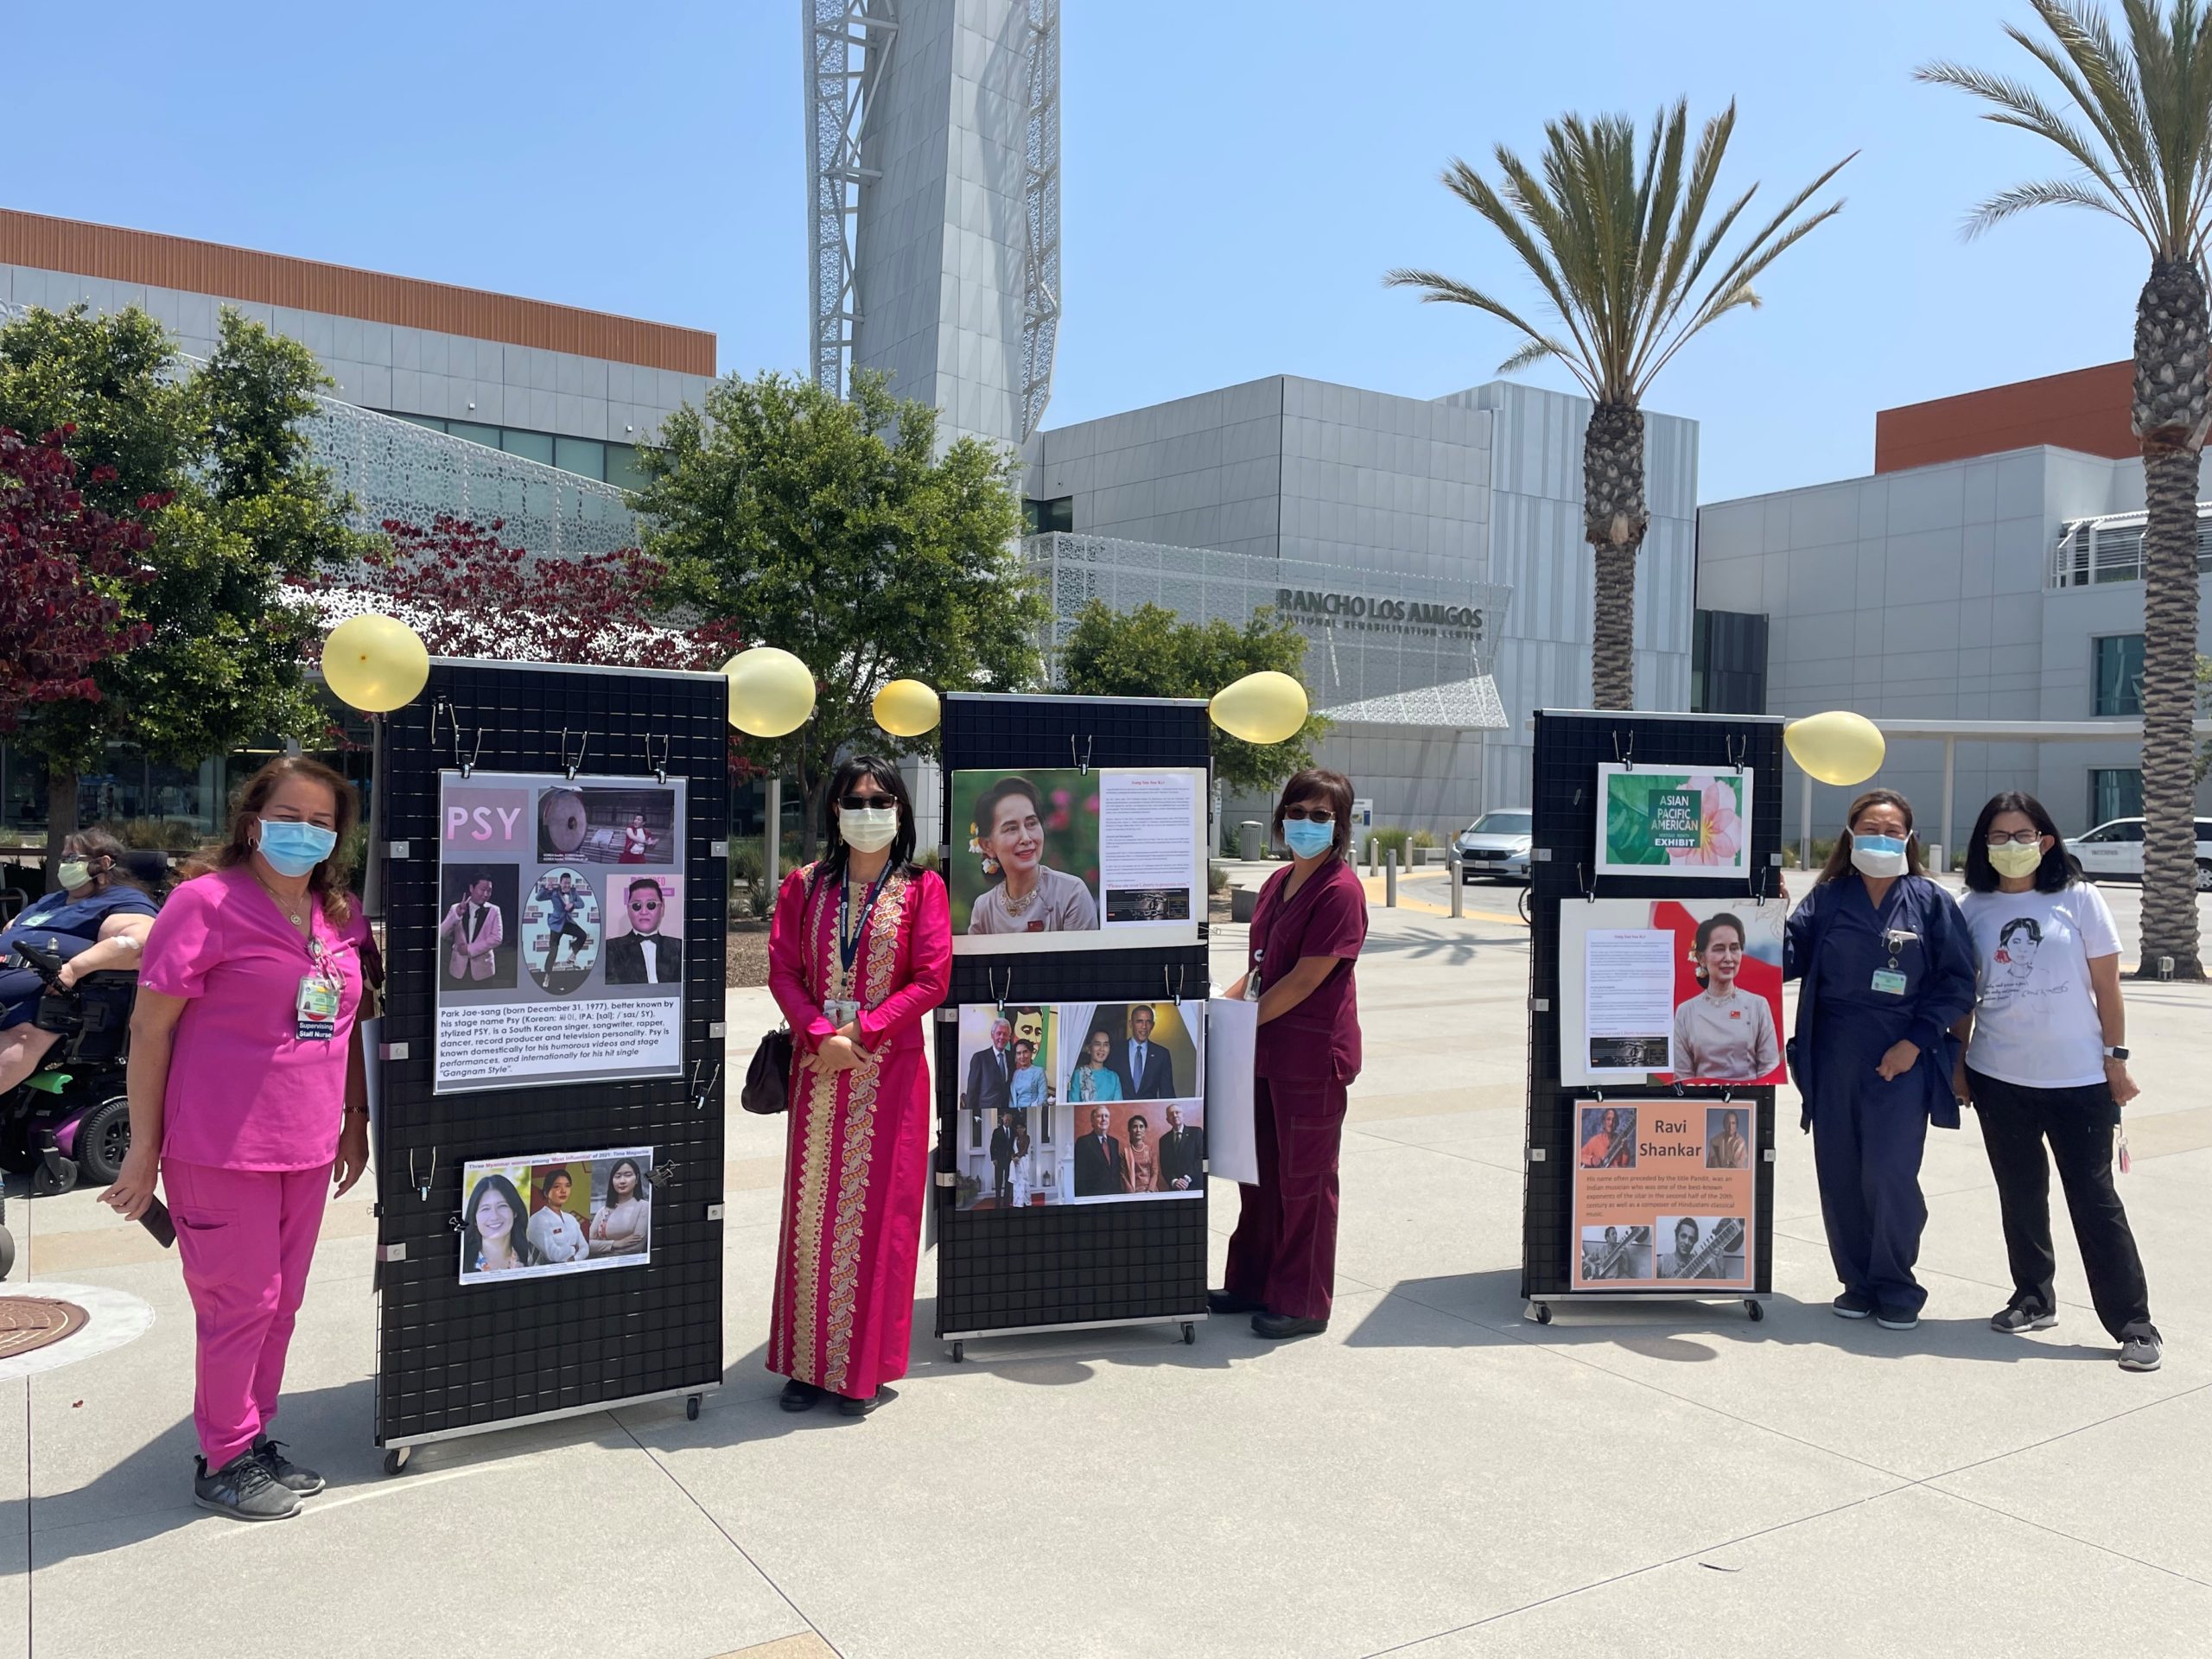 Staff at Rancho Los Amigos enjoy the displays in honor of AAPI month